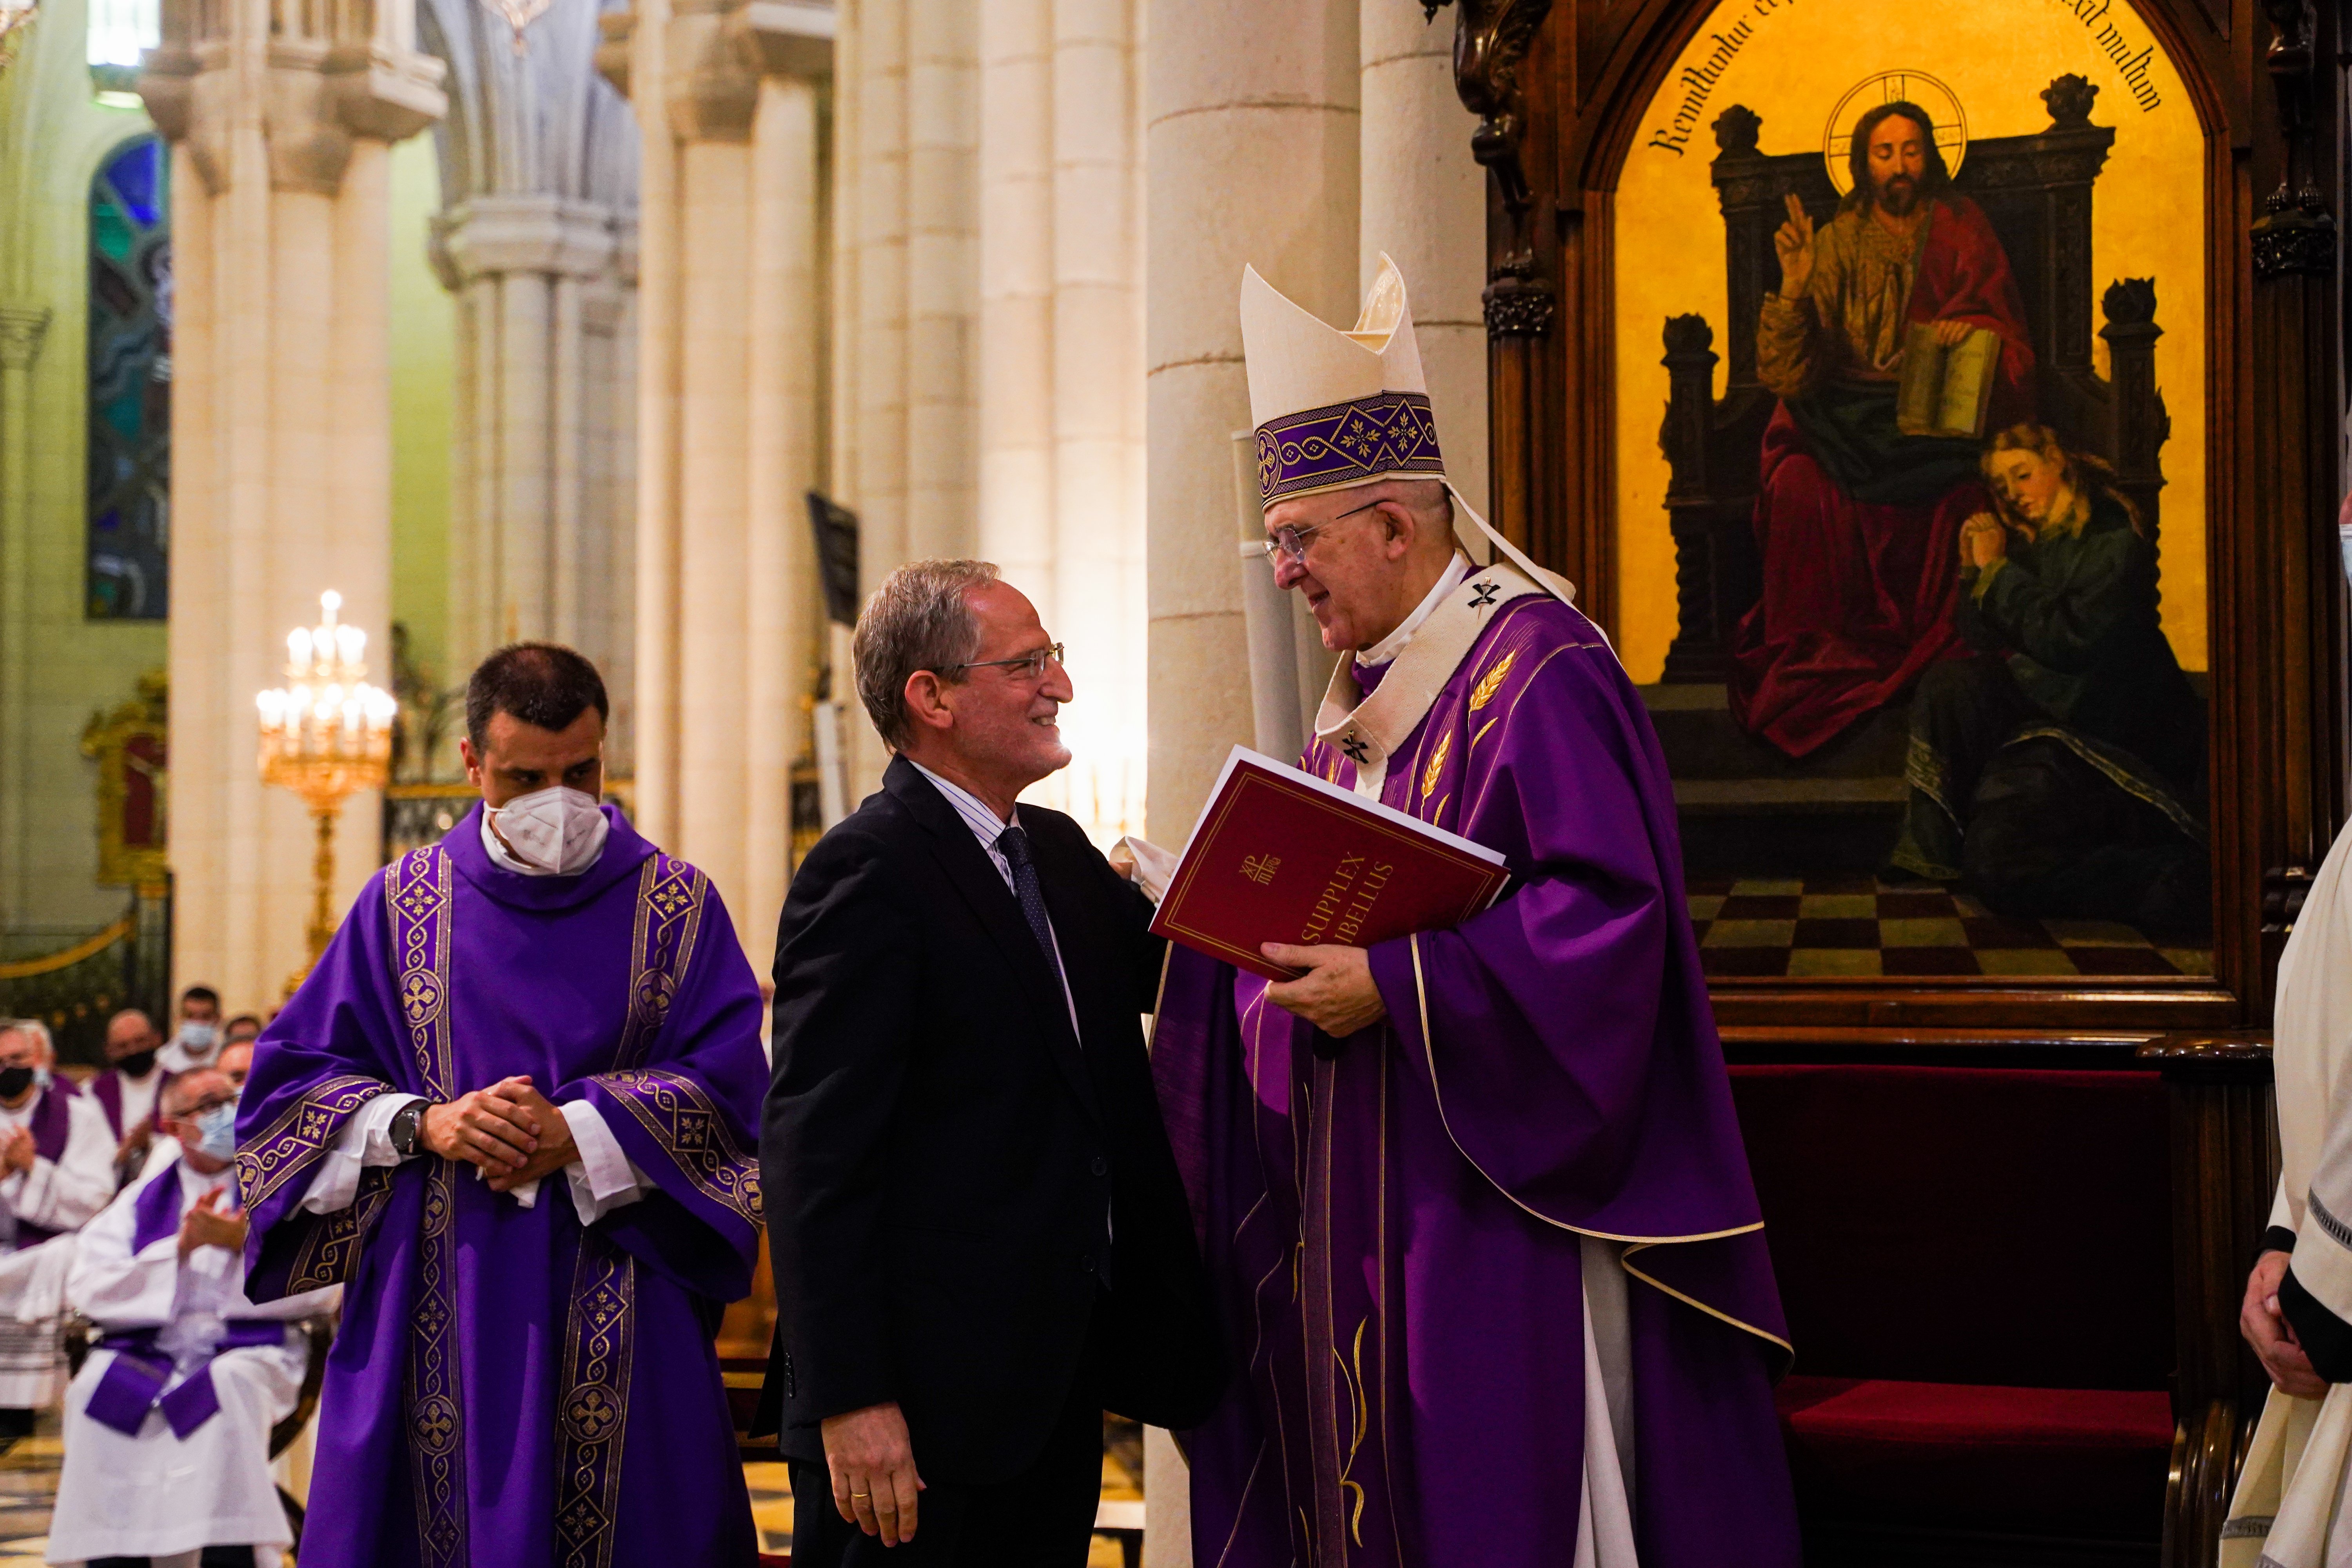 Carlos Metola, postulator of the sainthood cause of Carmen Hernández, presents to Cardinal Carlos Osoro Sierra of Madrid the written request that the sainthood process for her be formally opened, during a Mass in the cathedral in Madrid July 19, 2021. (CN